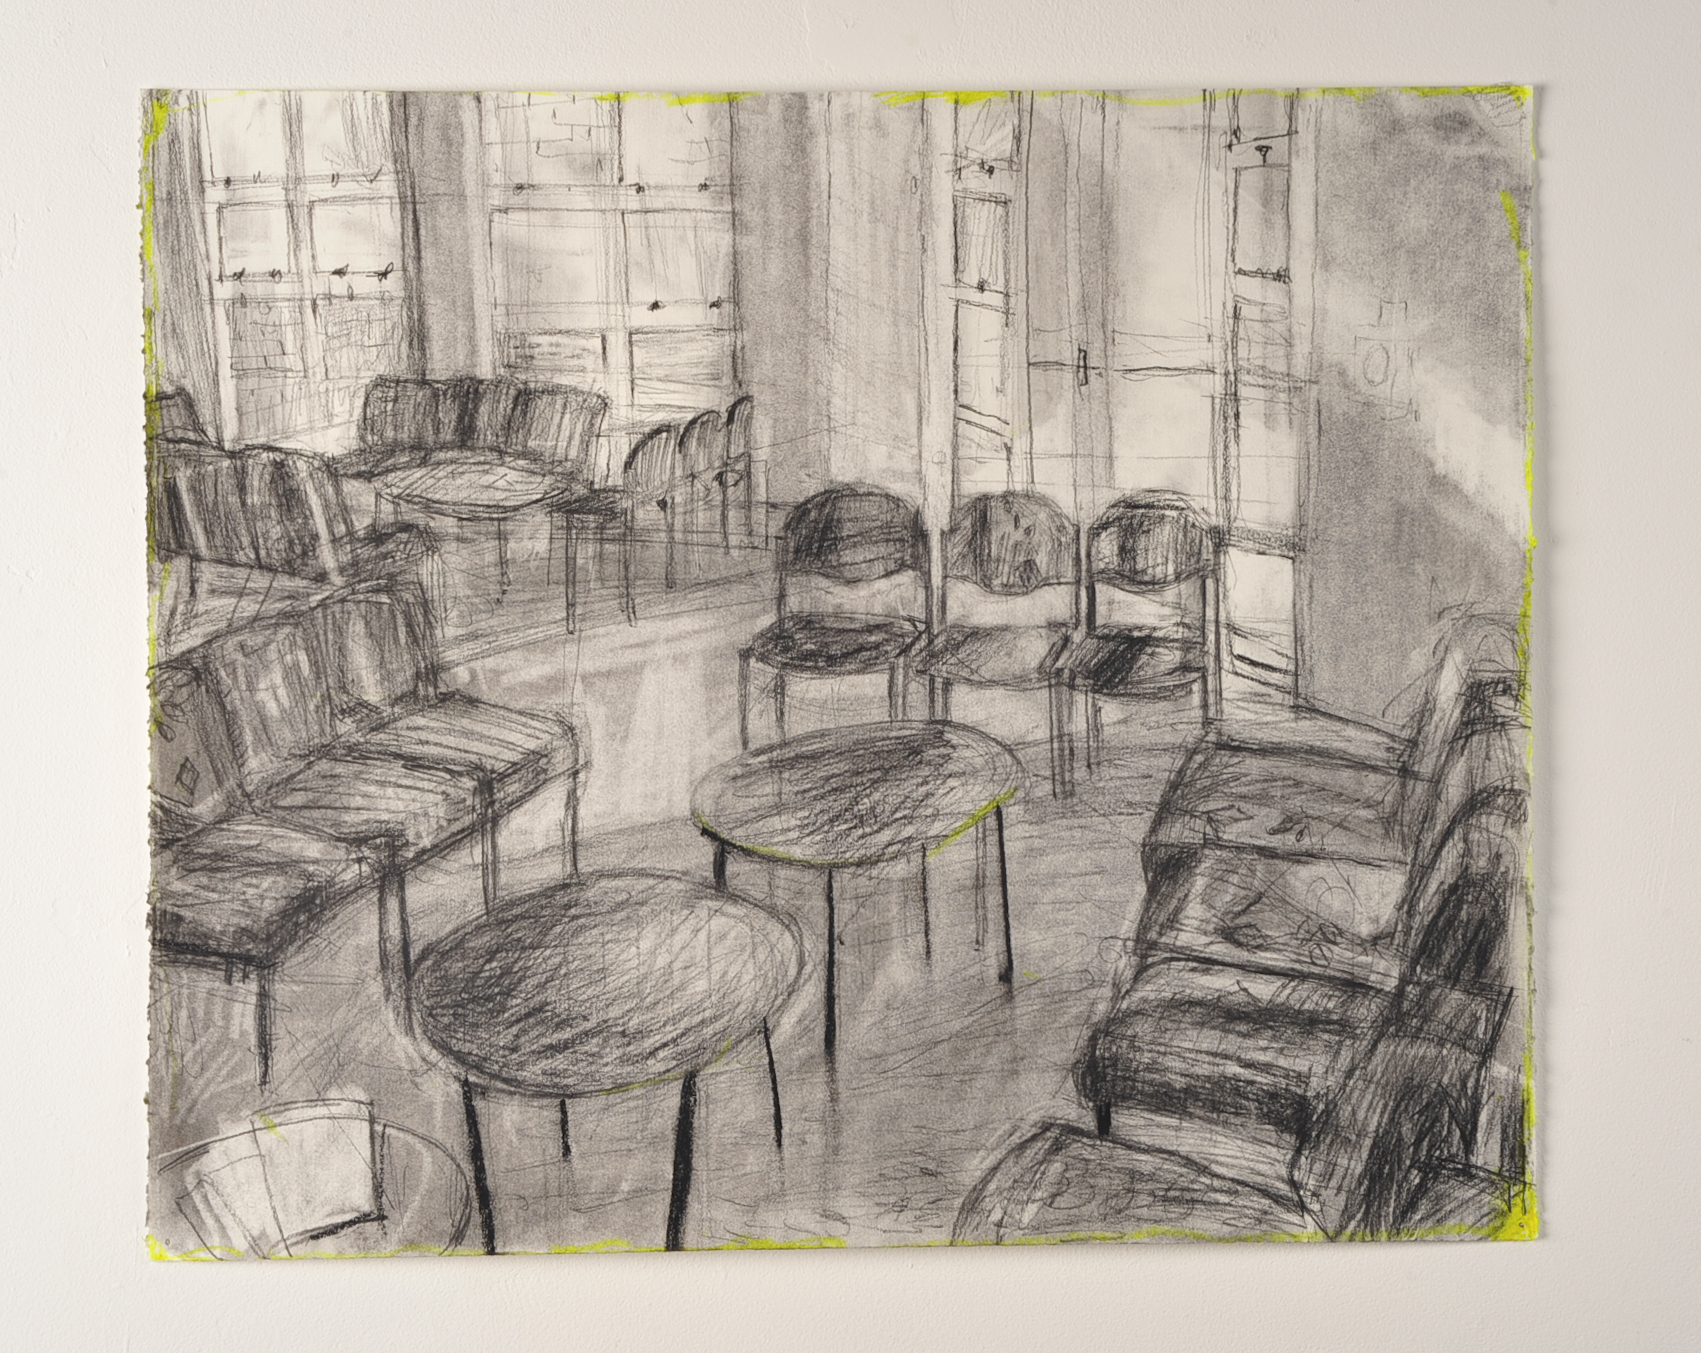  SHUTTER SPEED LUMINOSITY  Friends of chairs (foyer)  Charcoal and highlighter  55cm x 42cm, 2010    